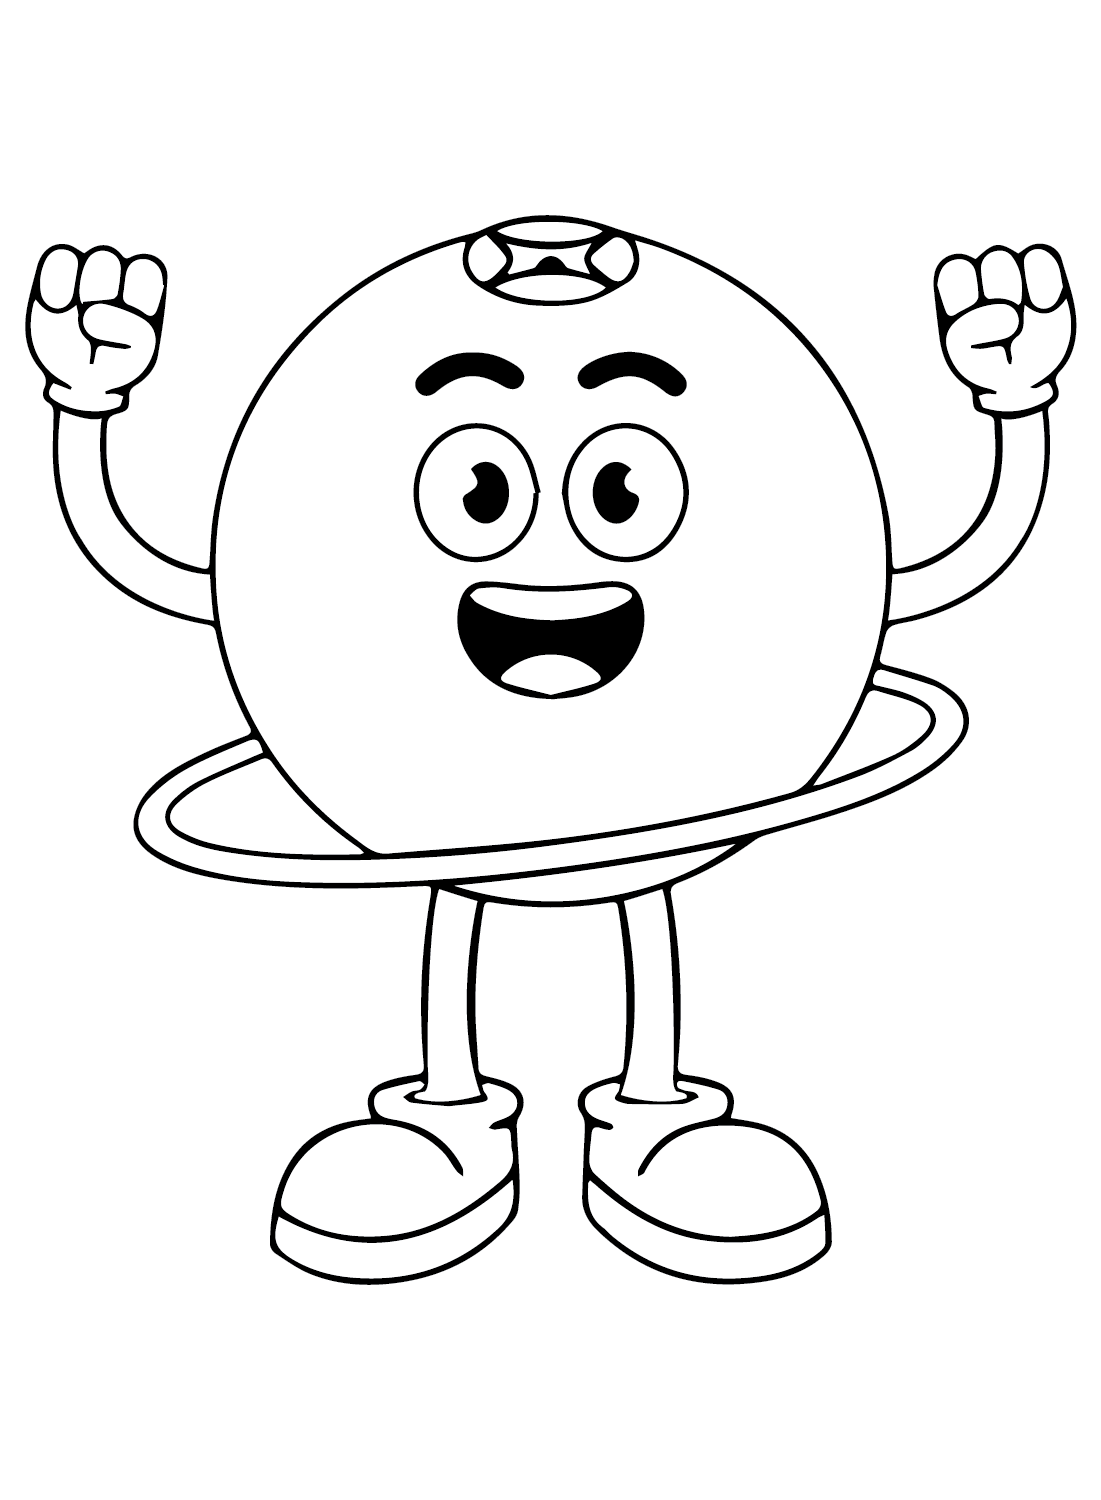 Mascot Cranberry Coloring Page